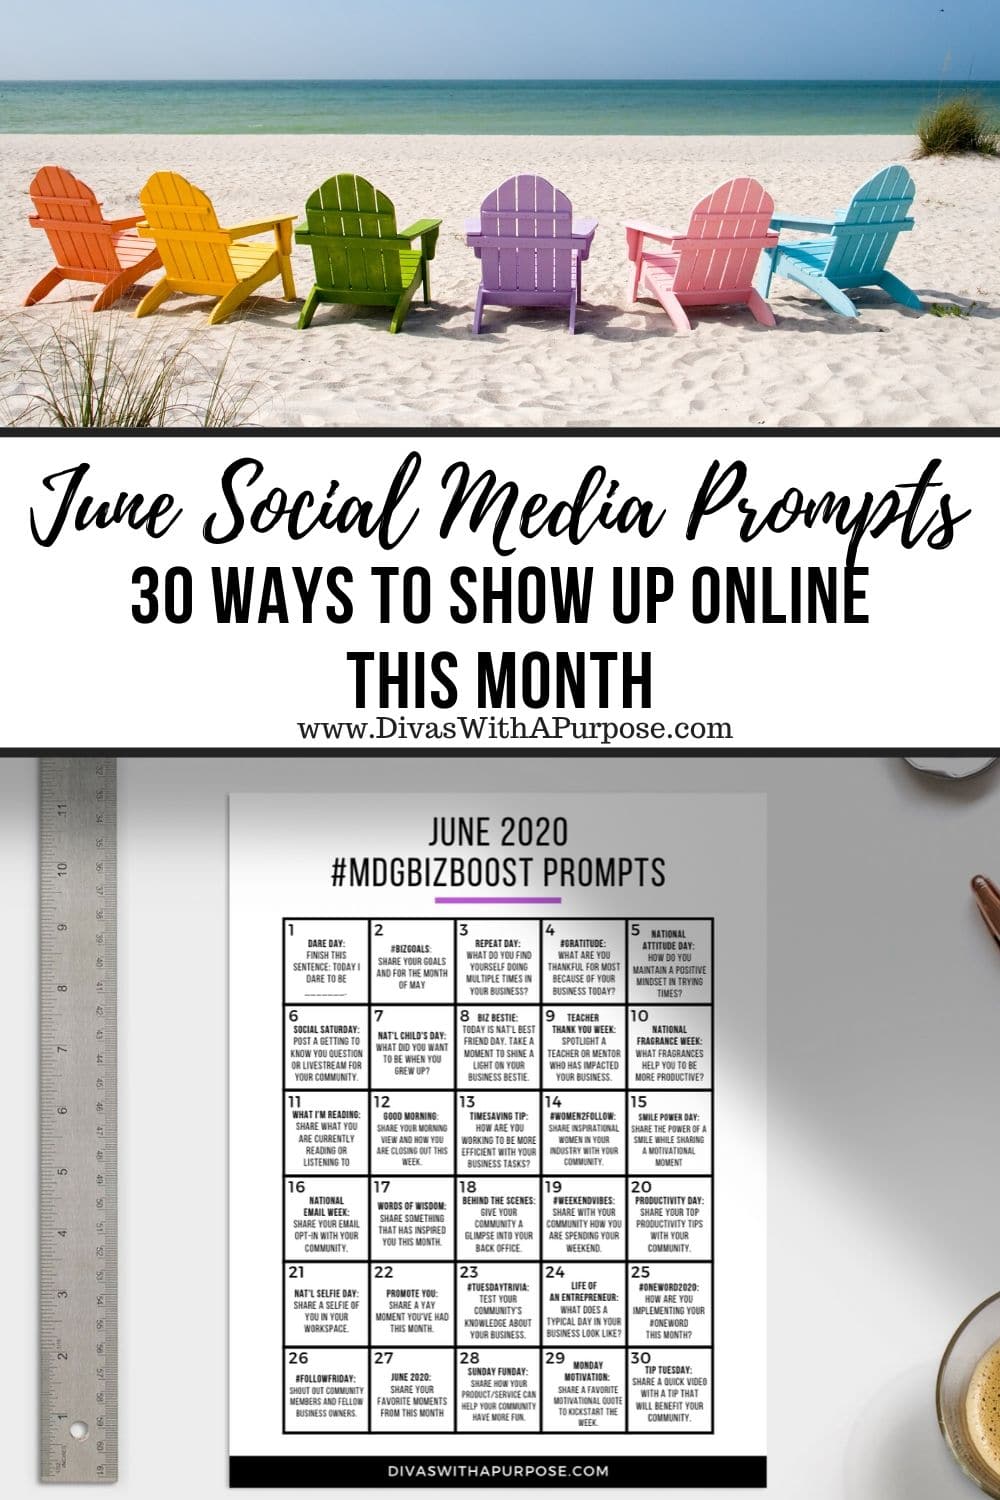 June Social Media Prompts_ Free social media prompts for June to show up consistently online